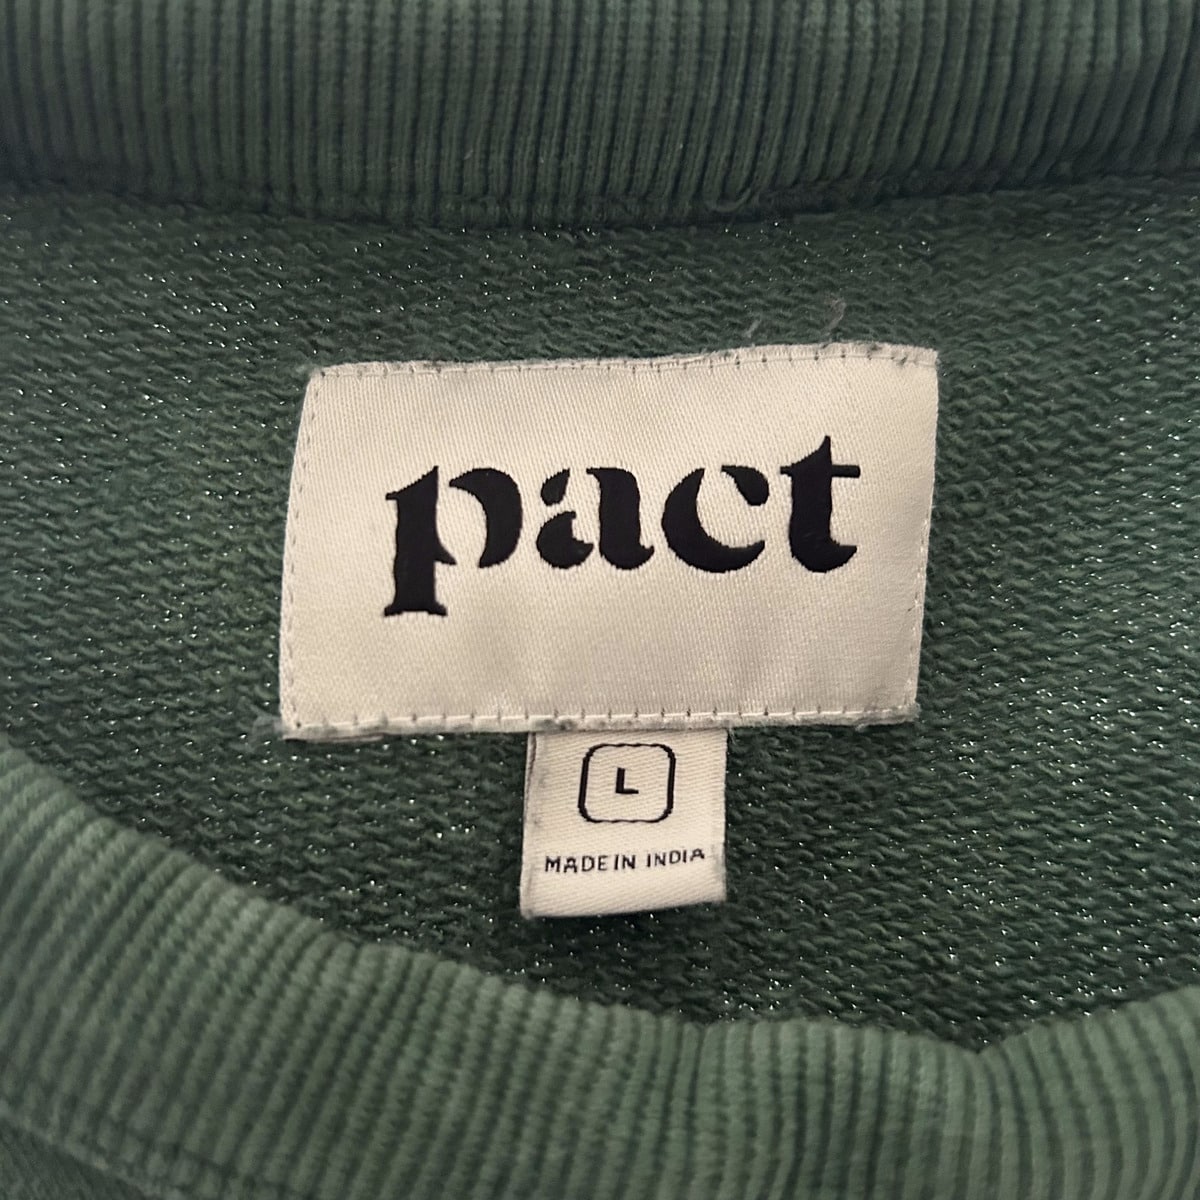 PACT - Sustainable Clothing Facts, Rating, Goals